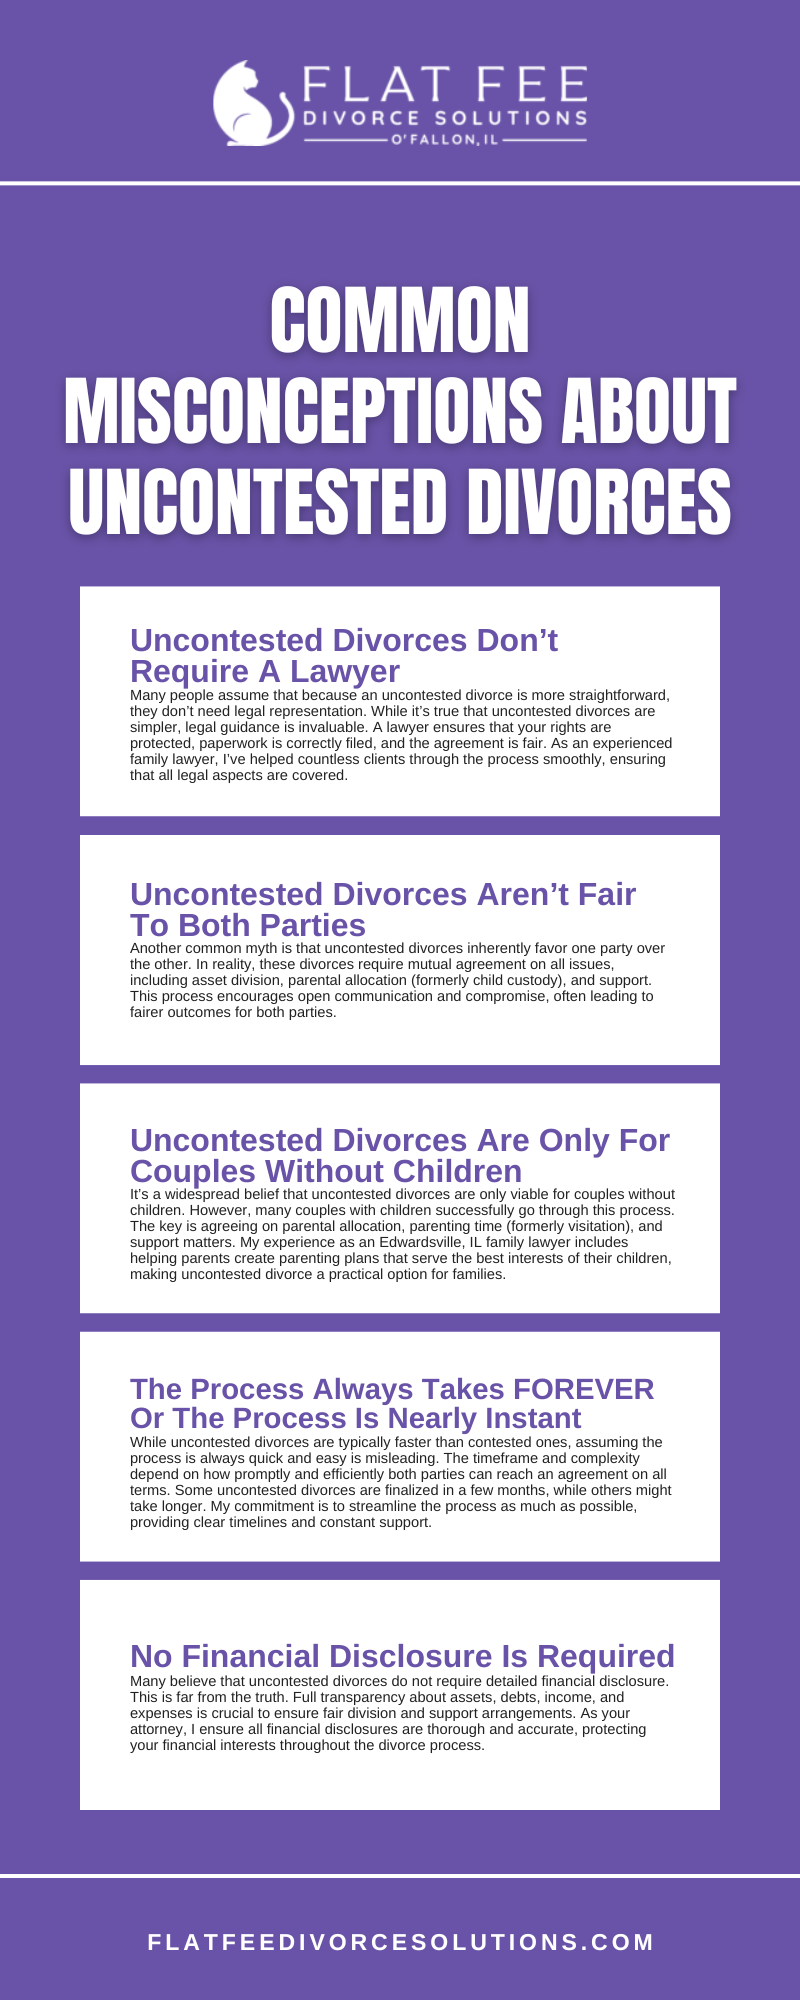 Common Misconceptions About Uncontested Divorces Infographic